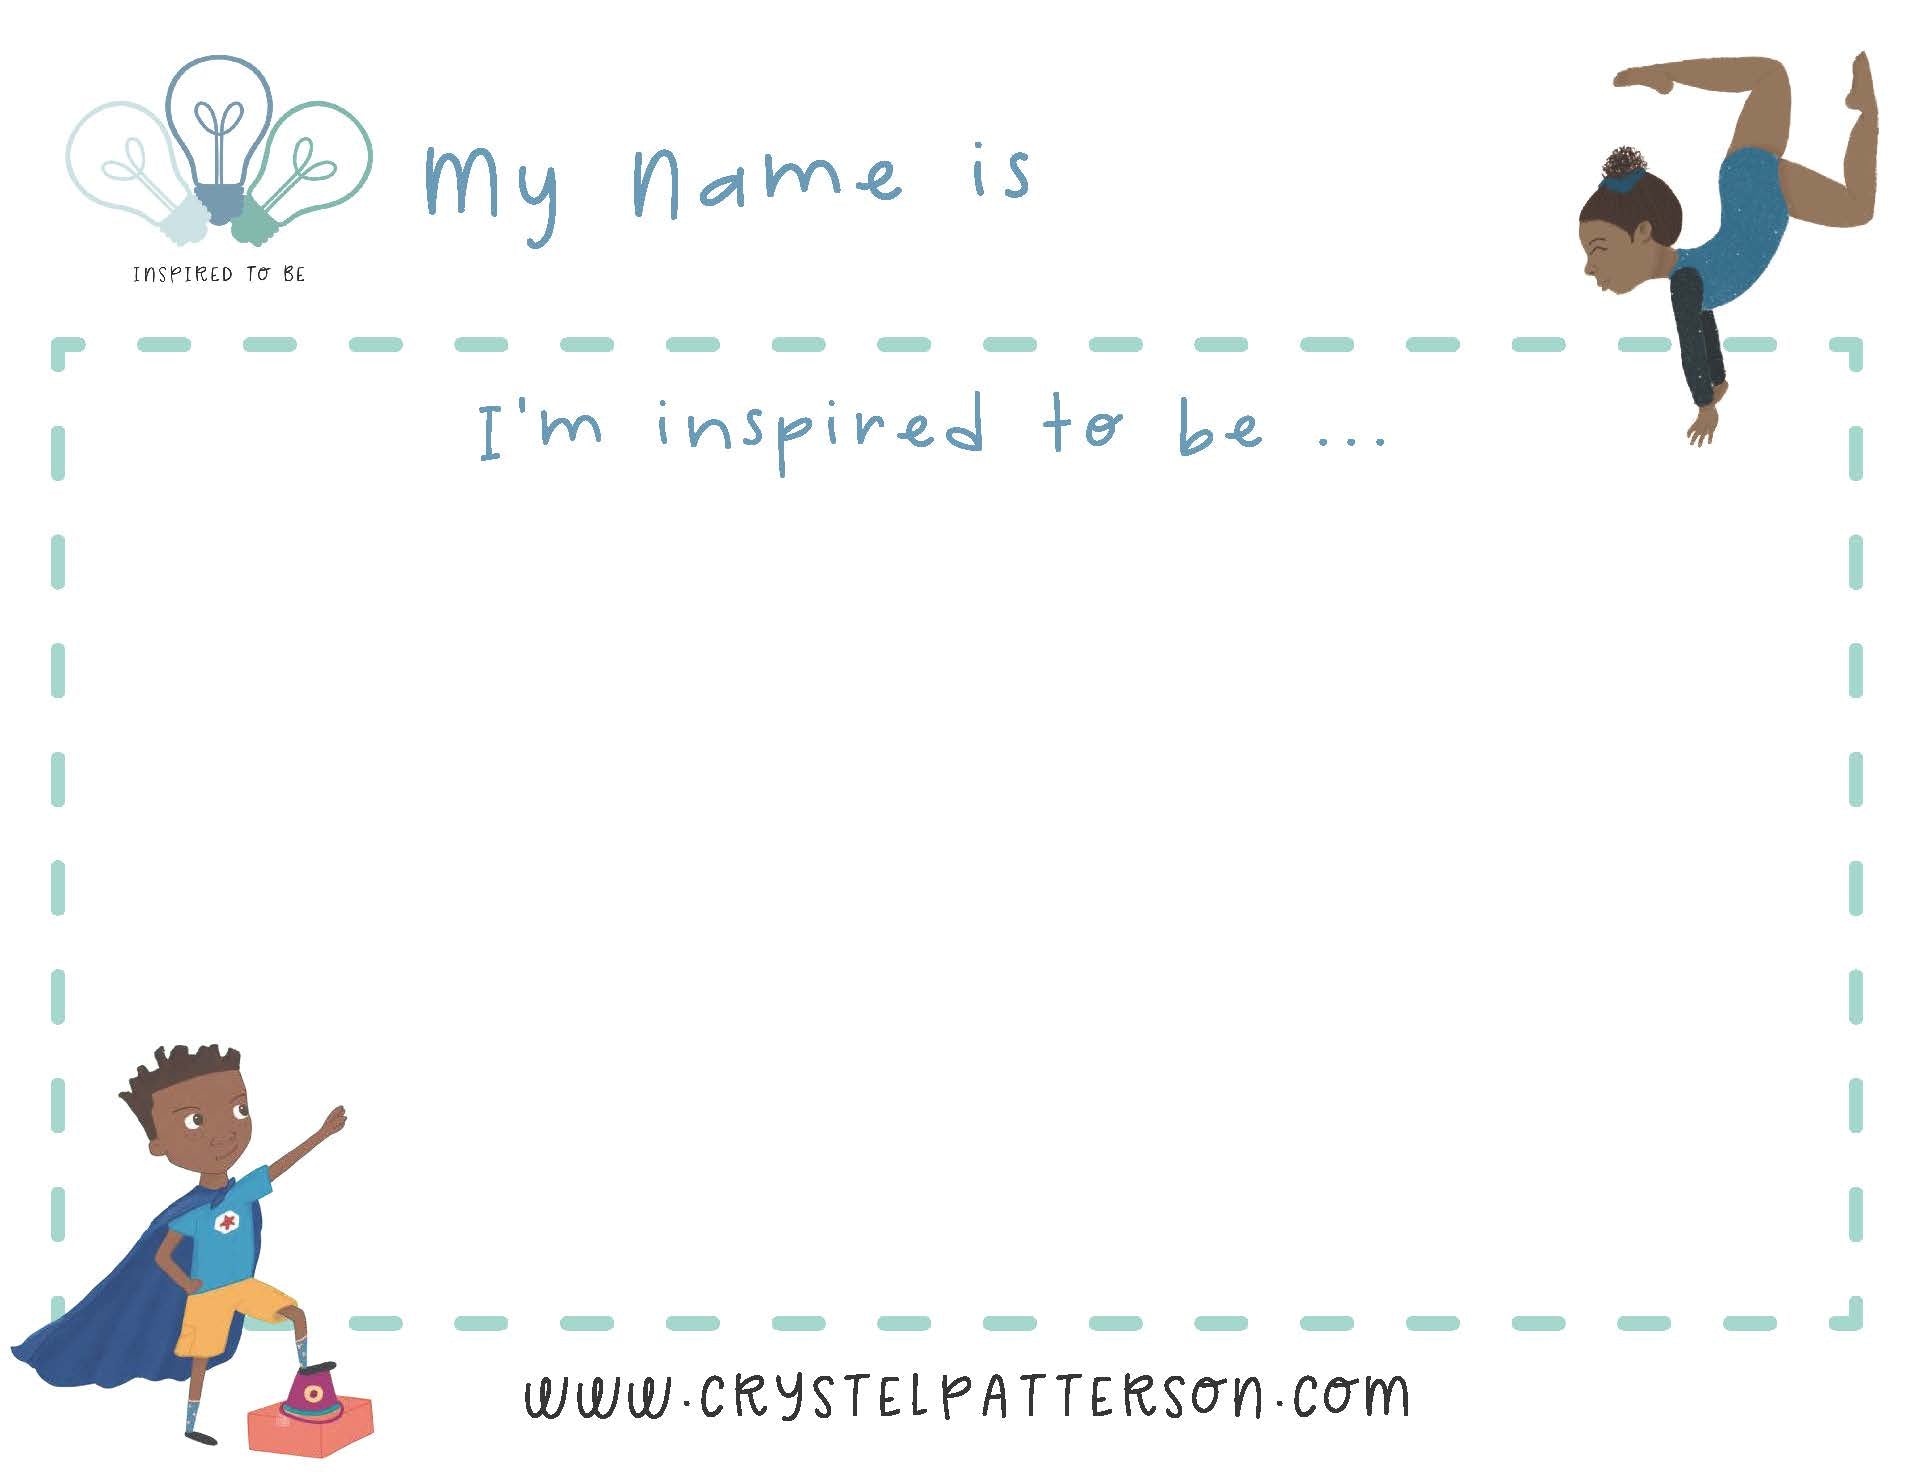 "I'm inspired to be..." Activity Sheet